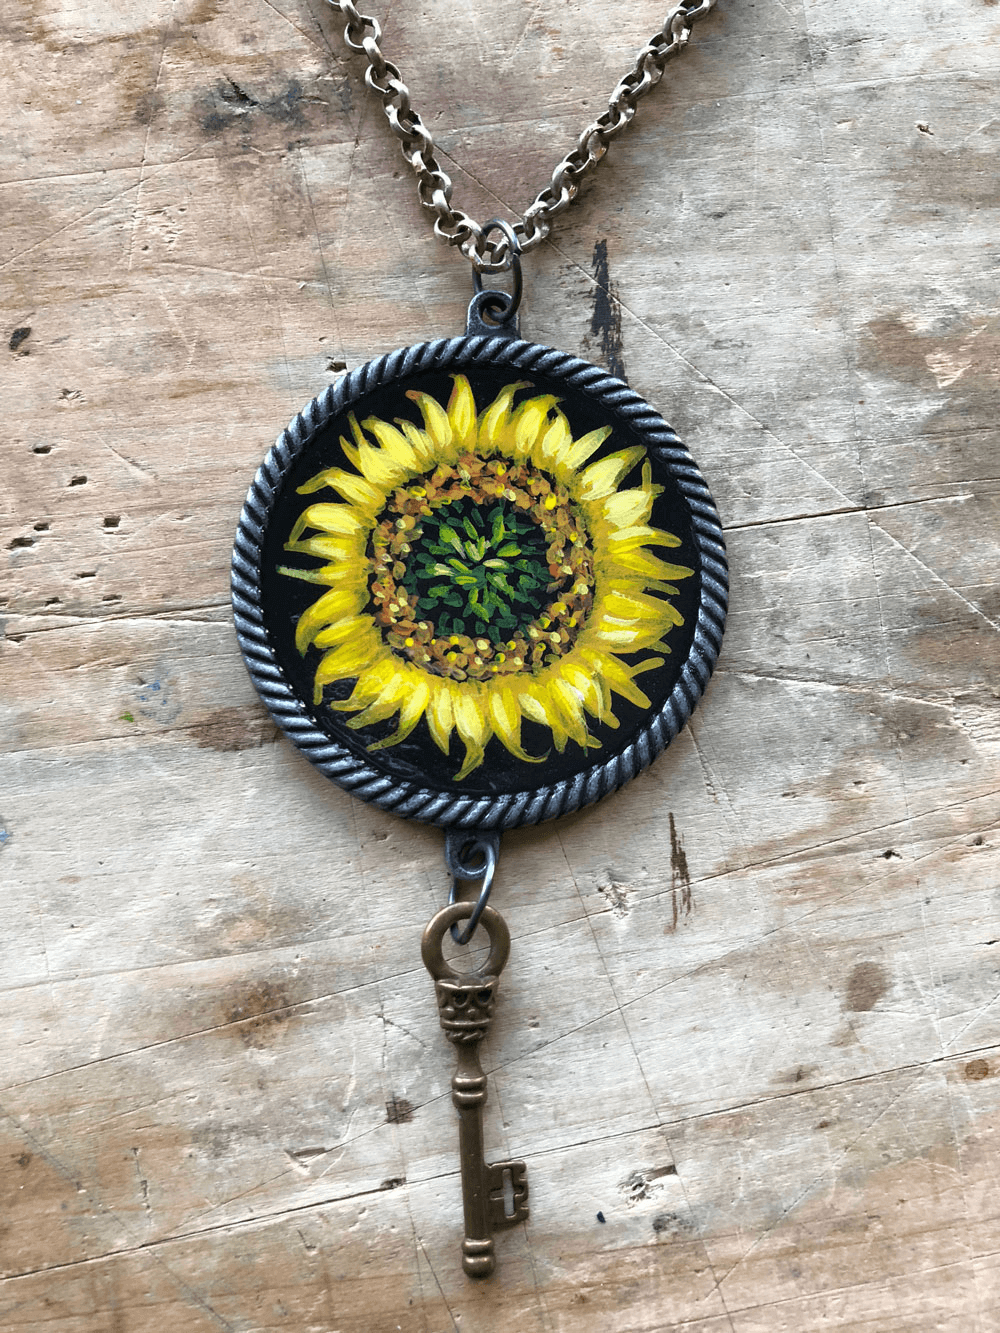 Make a sunflower necklace by learning to paint with acrylic paints!